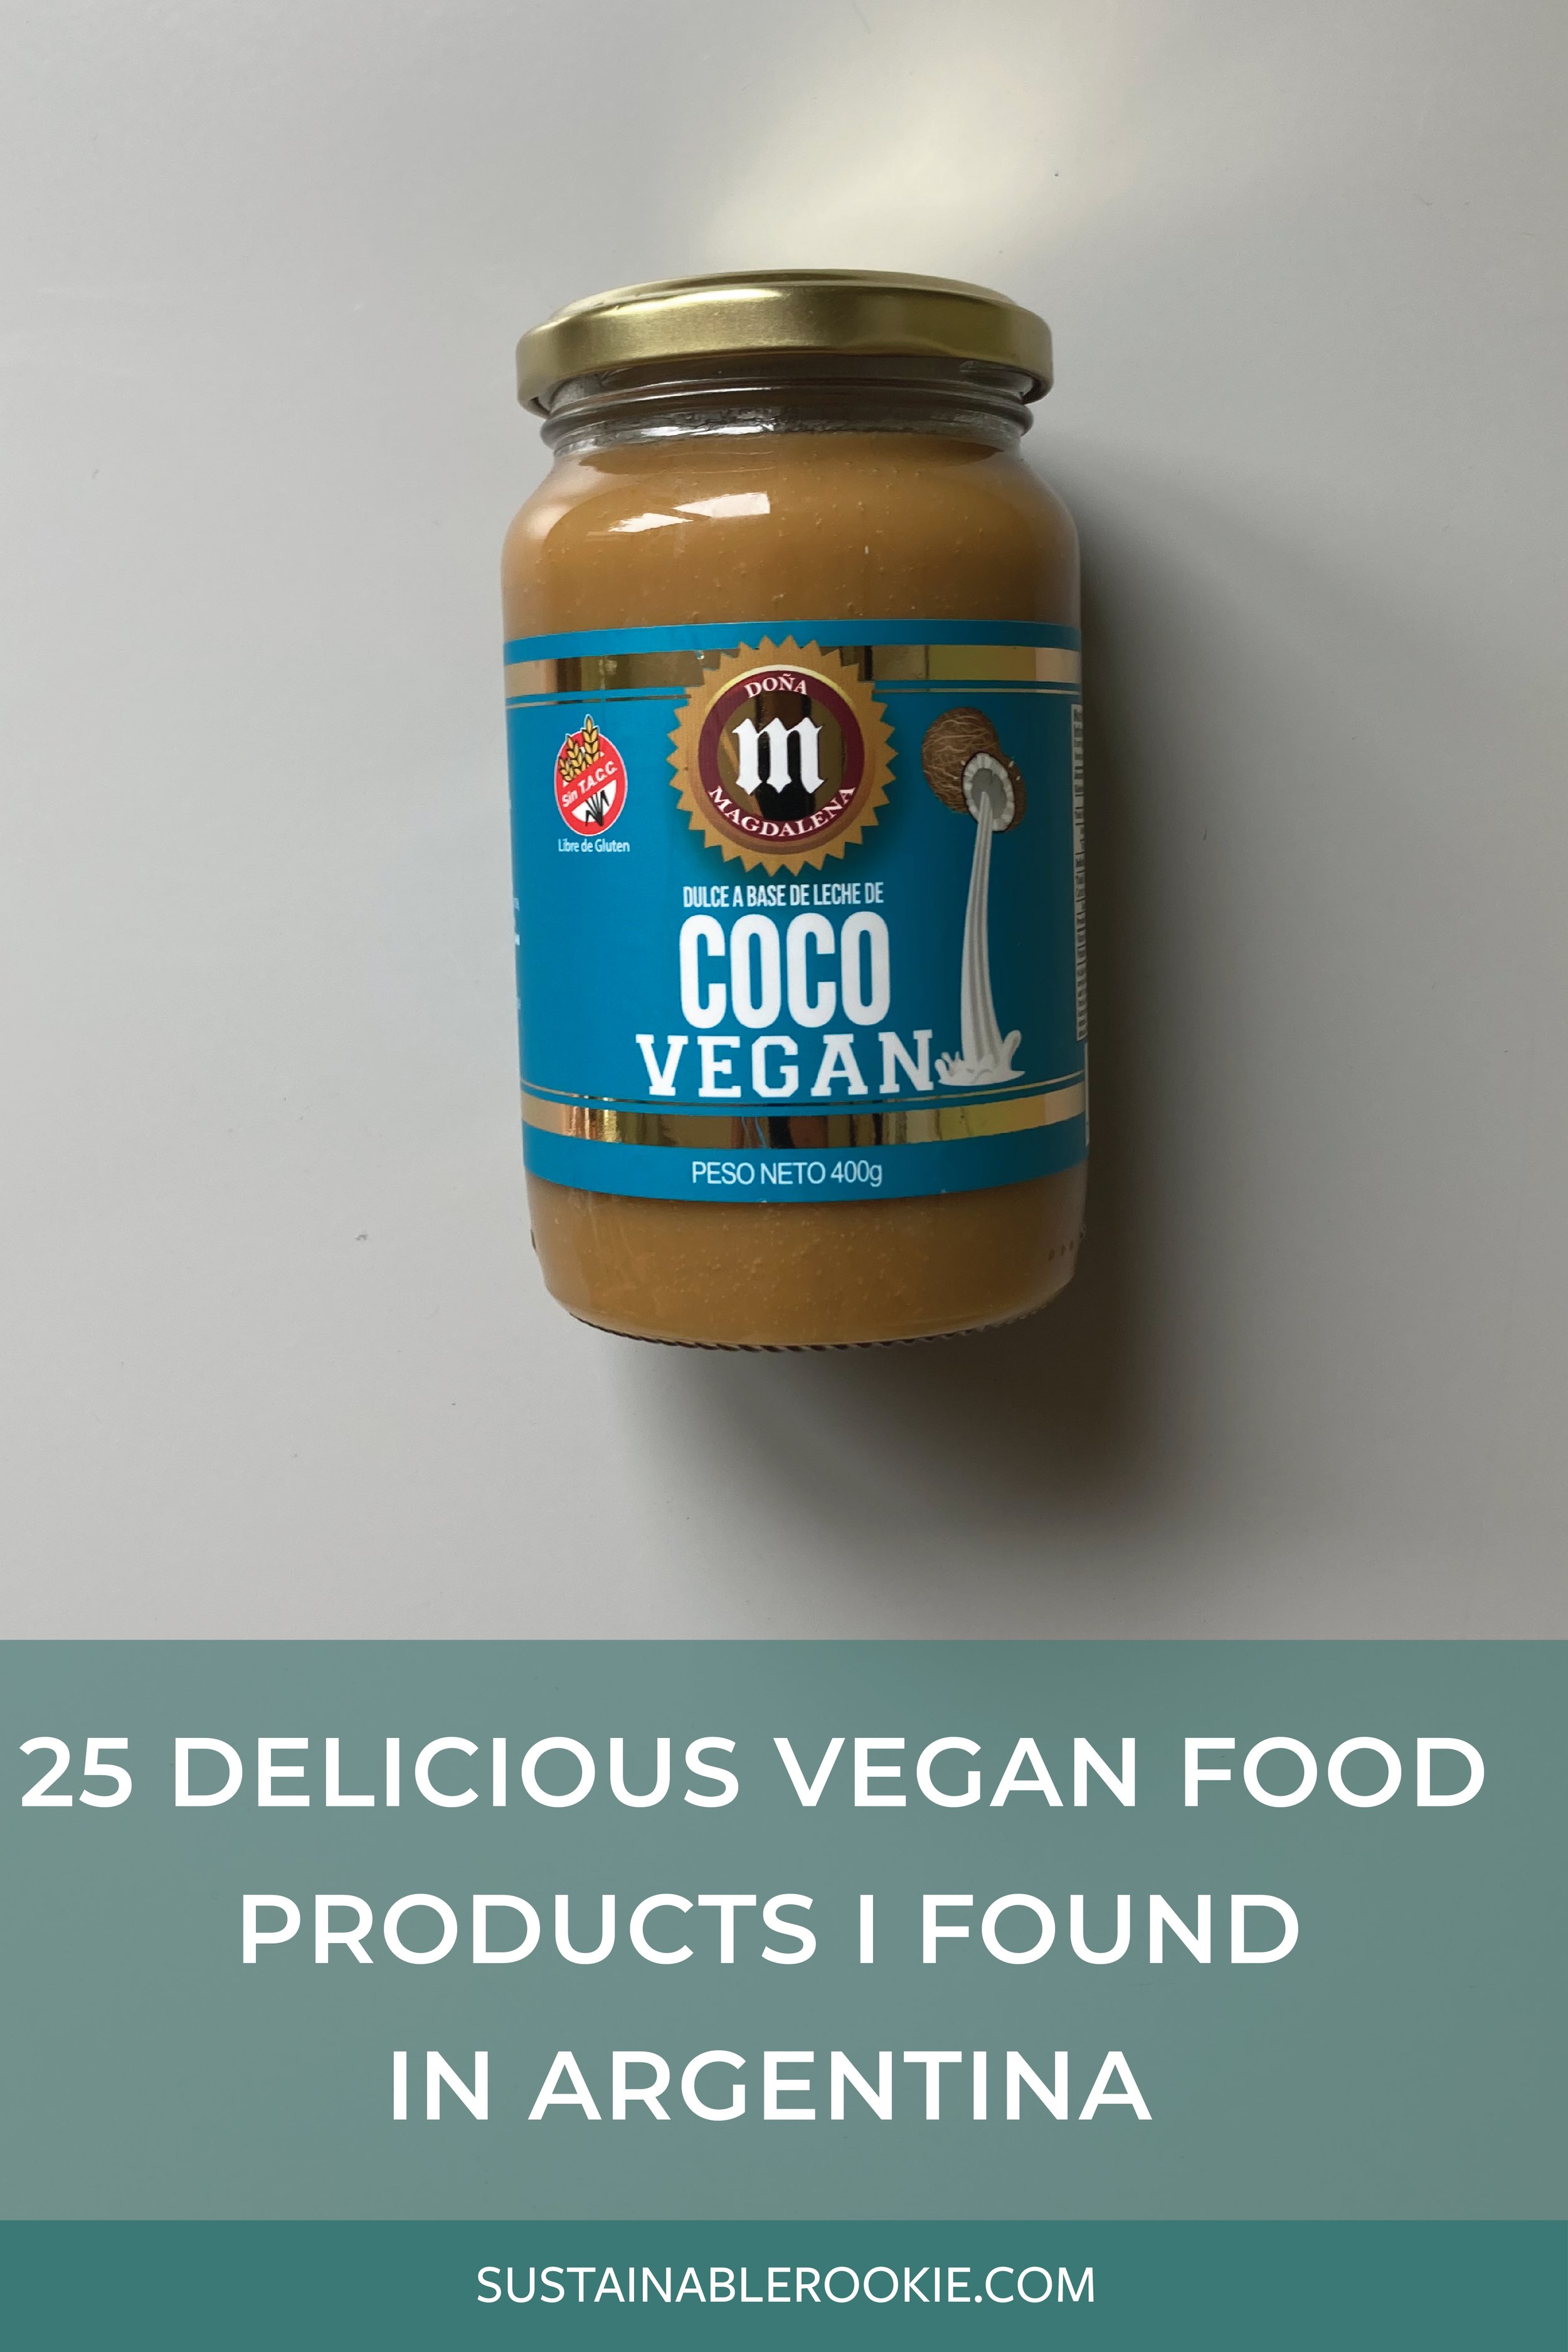 25 Delicious Vegan Food Products I Found in Argentina — Sustainable Rookie